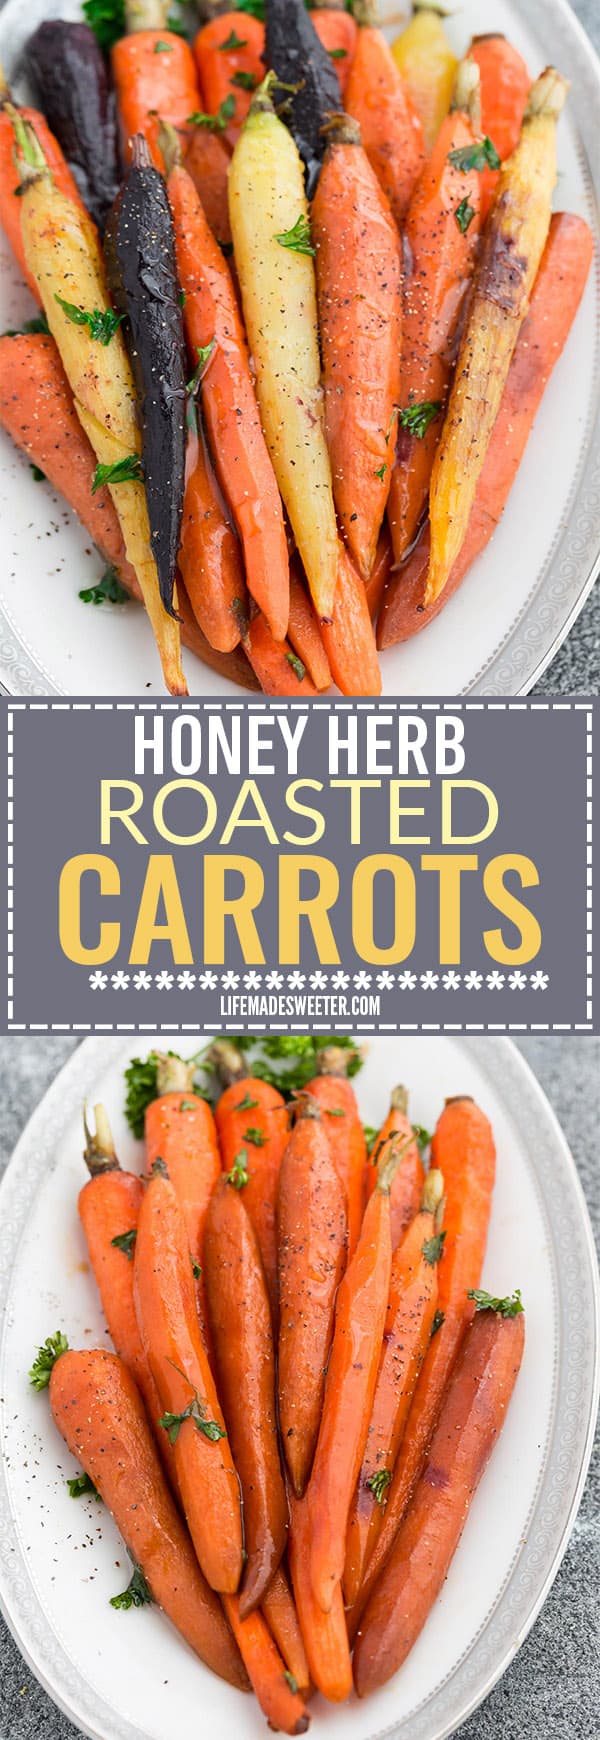 Honey Roasted Carrots is an easy side dish recipe that's perfect for potlucks, holidays and any busy weeknight. Best of all, you can easily customize it with rainbow carrots and your favorite seasonings.